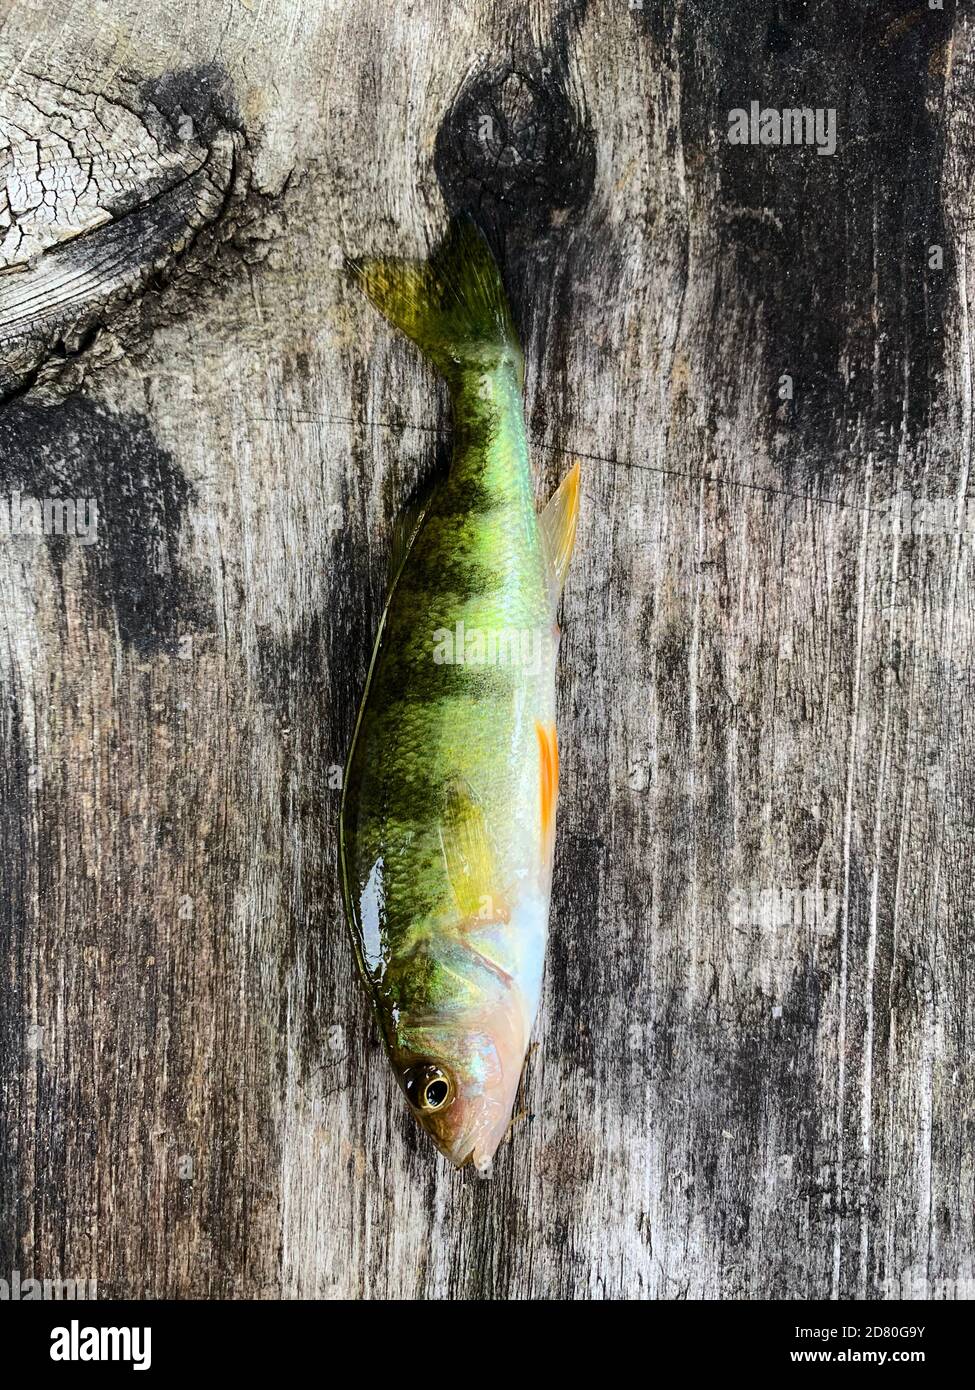 Small yellow perch fish fresh off the line on wooden picnic table. Stock Photo